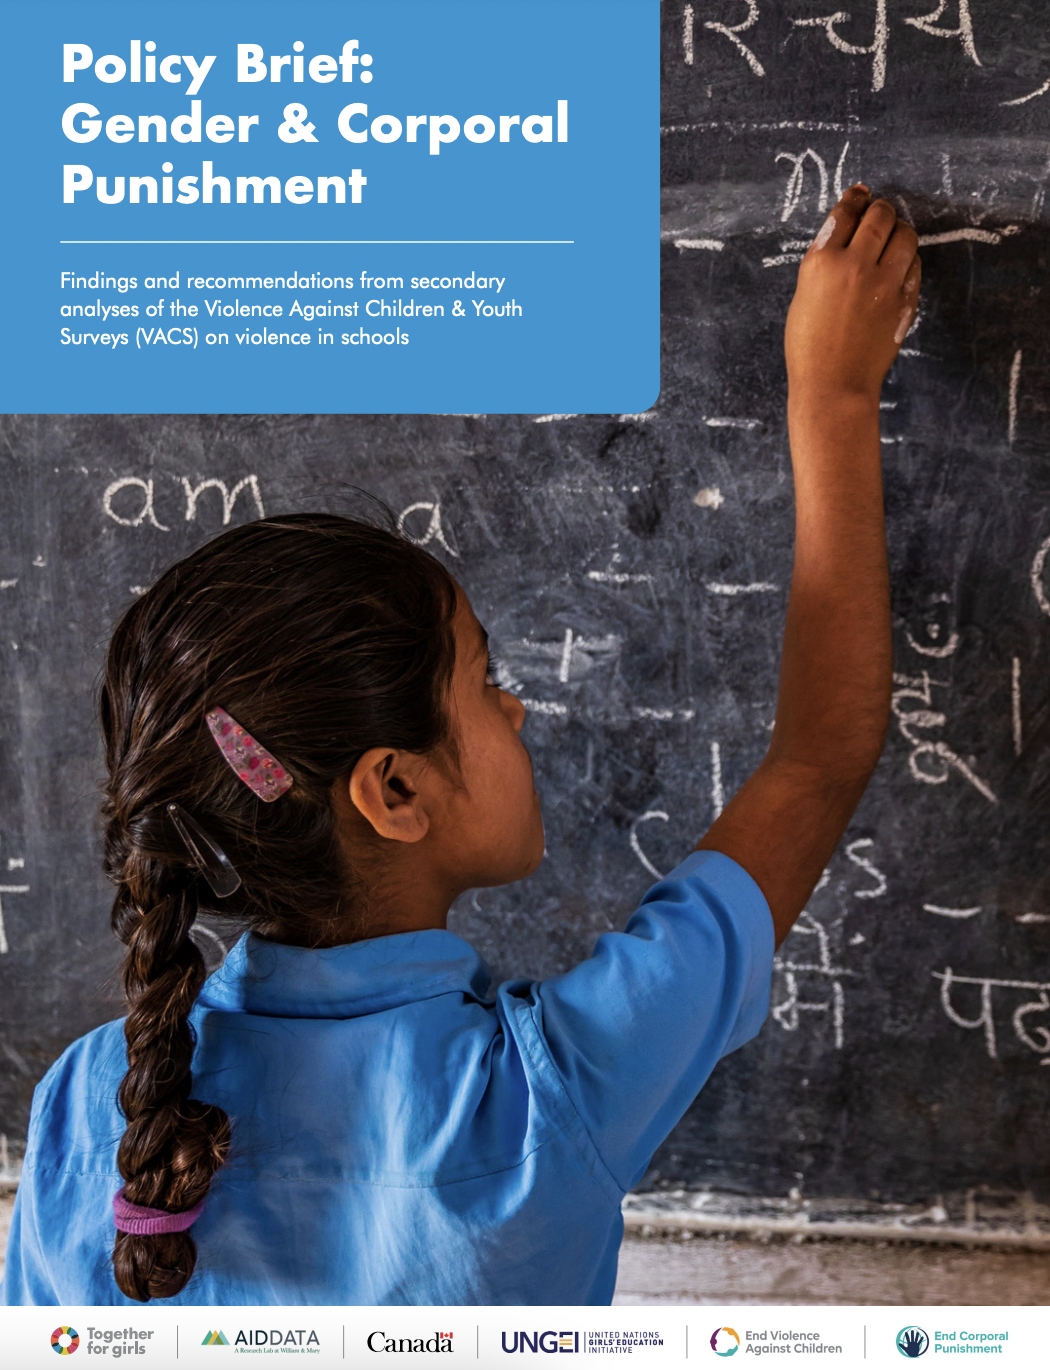 Gender and corporal punishment policy brief